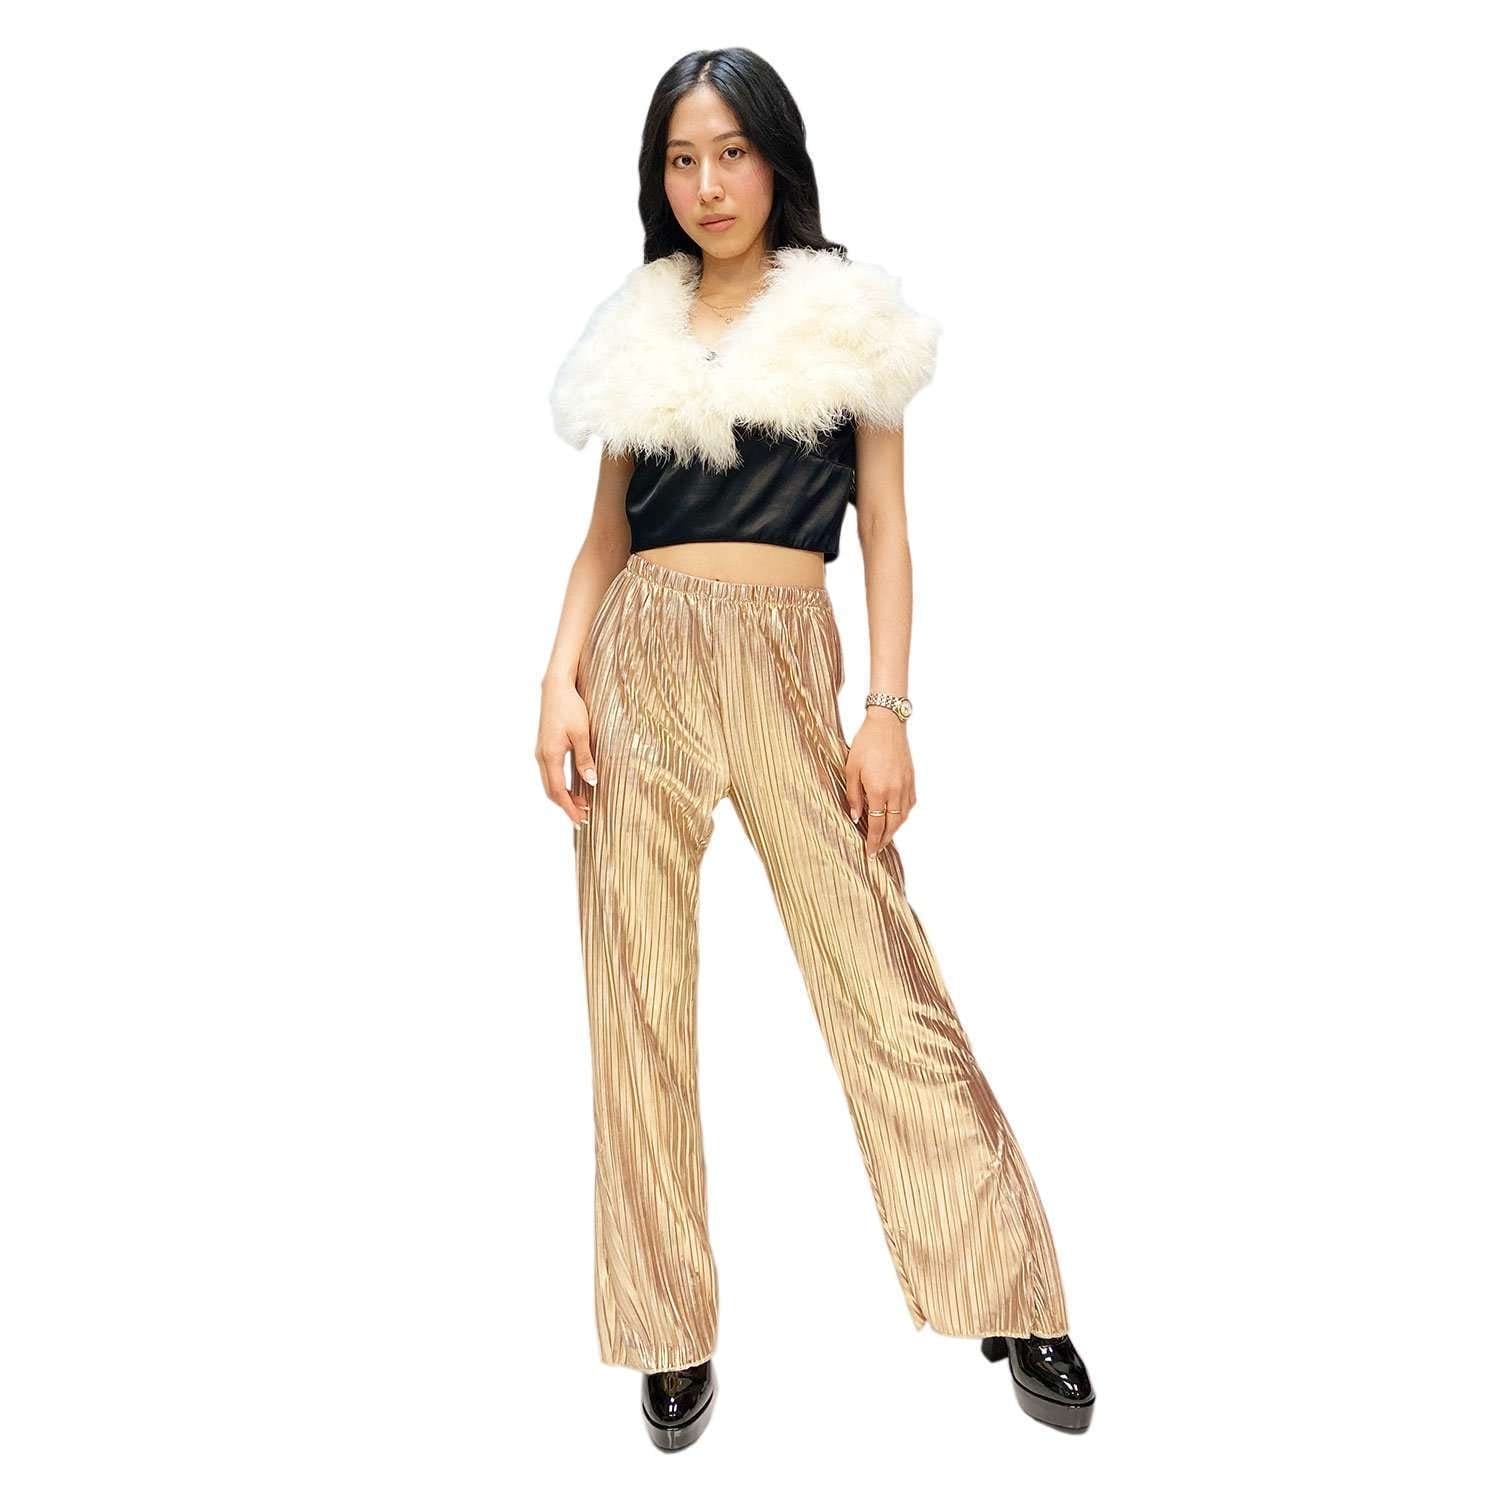 1970s Disco Party Outfit Womens Adult Costume